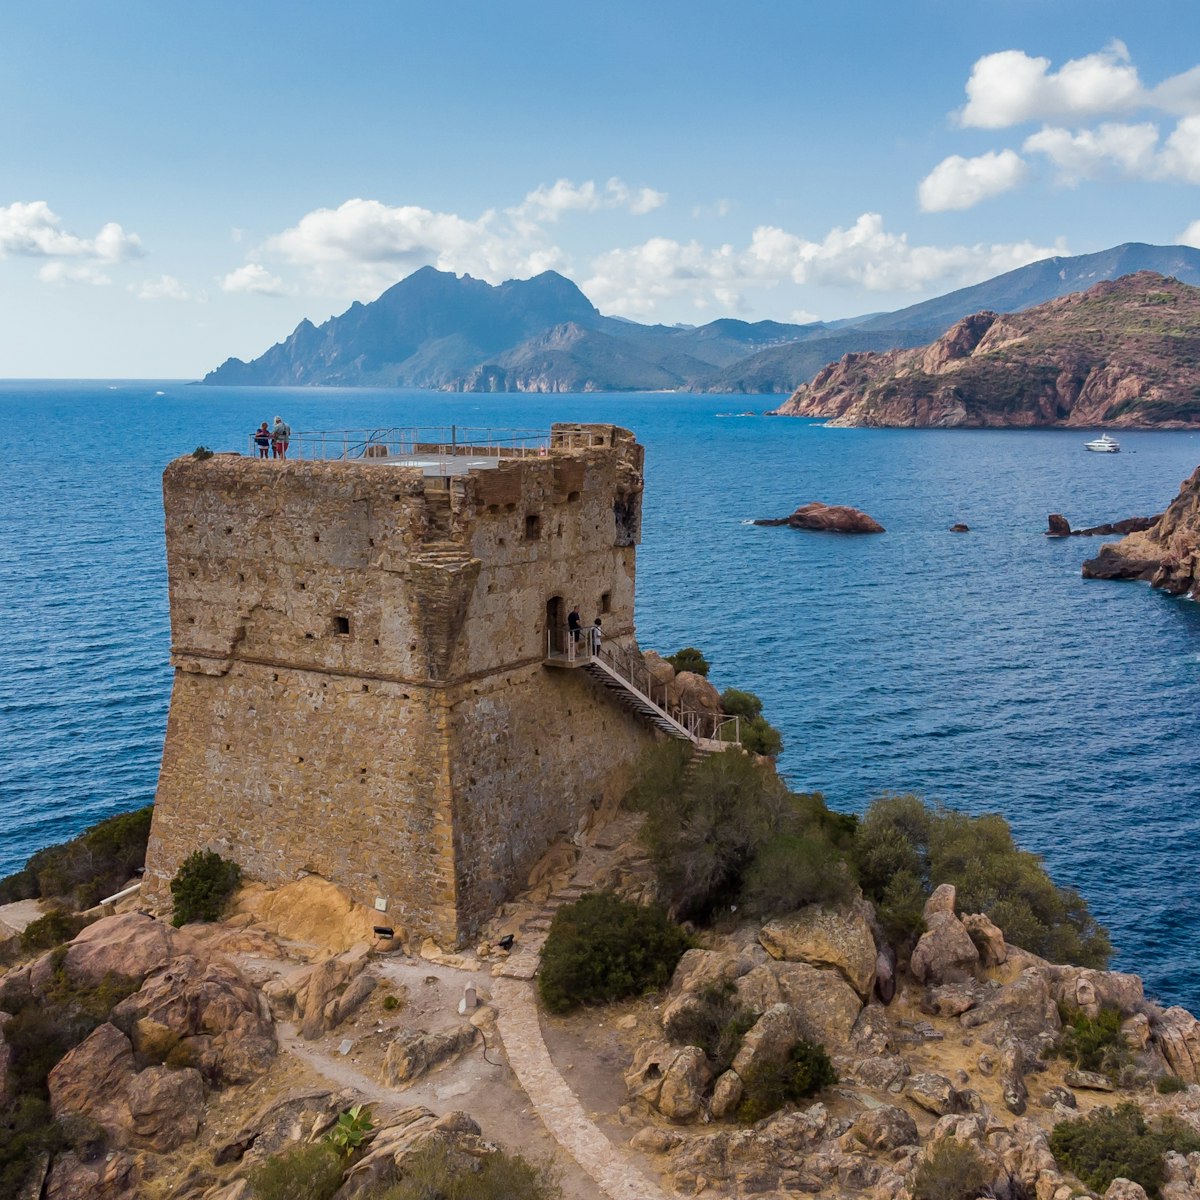 Aerial view of the ruins of the square Genoese tower of Porto at the end of the Gulf of Porto, Corsica, France.